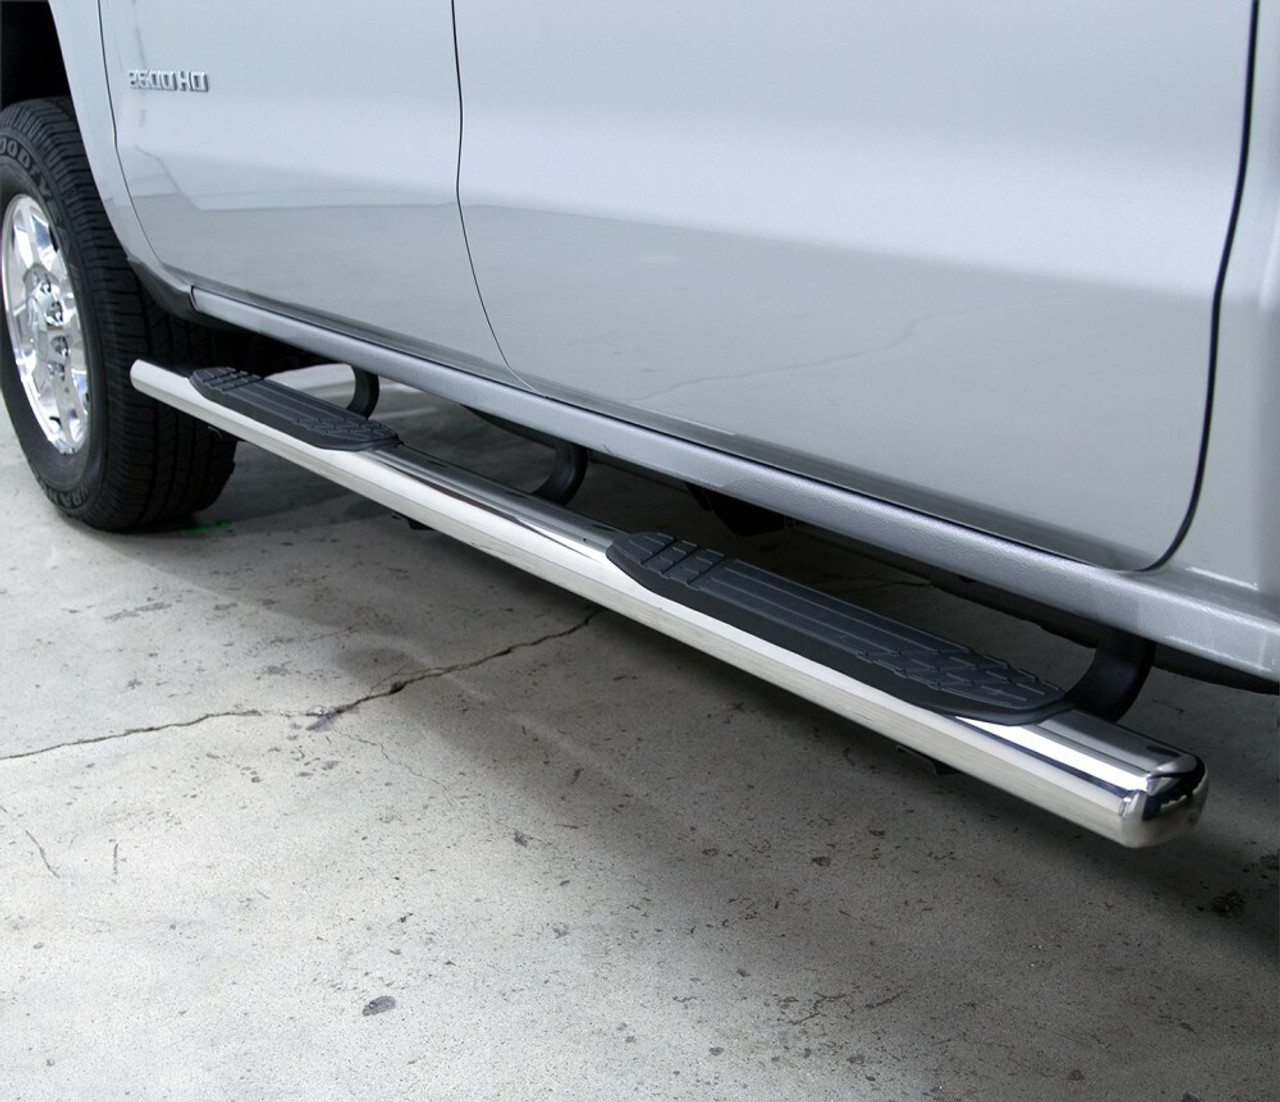 Go Rhino 684415587PS Ford, F-150, 2015 - 2021, 4 inch OE Xtreme - Complete Kit: Sidesteps + Brackets, Stainless steel, Polished, 640087PS side bars + 6841555 OE Xtreme Brackets. 4 inch wide x 87 inch long side bars. Welded end caps